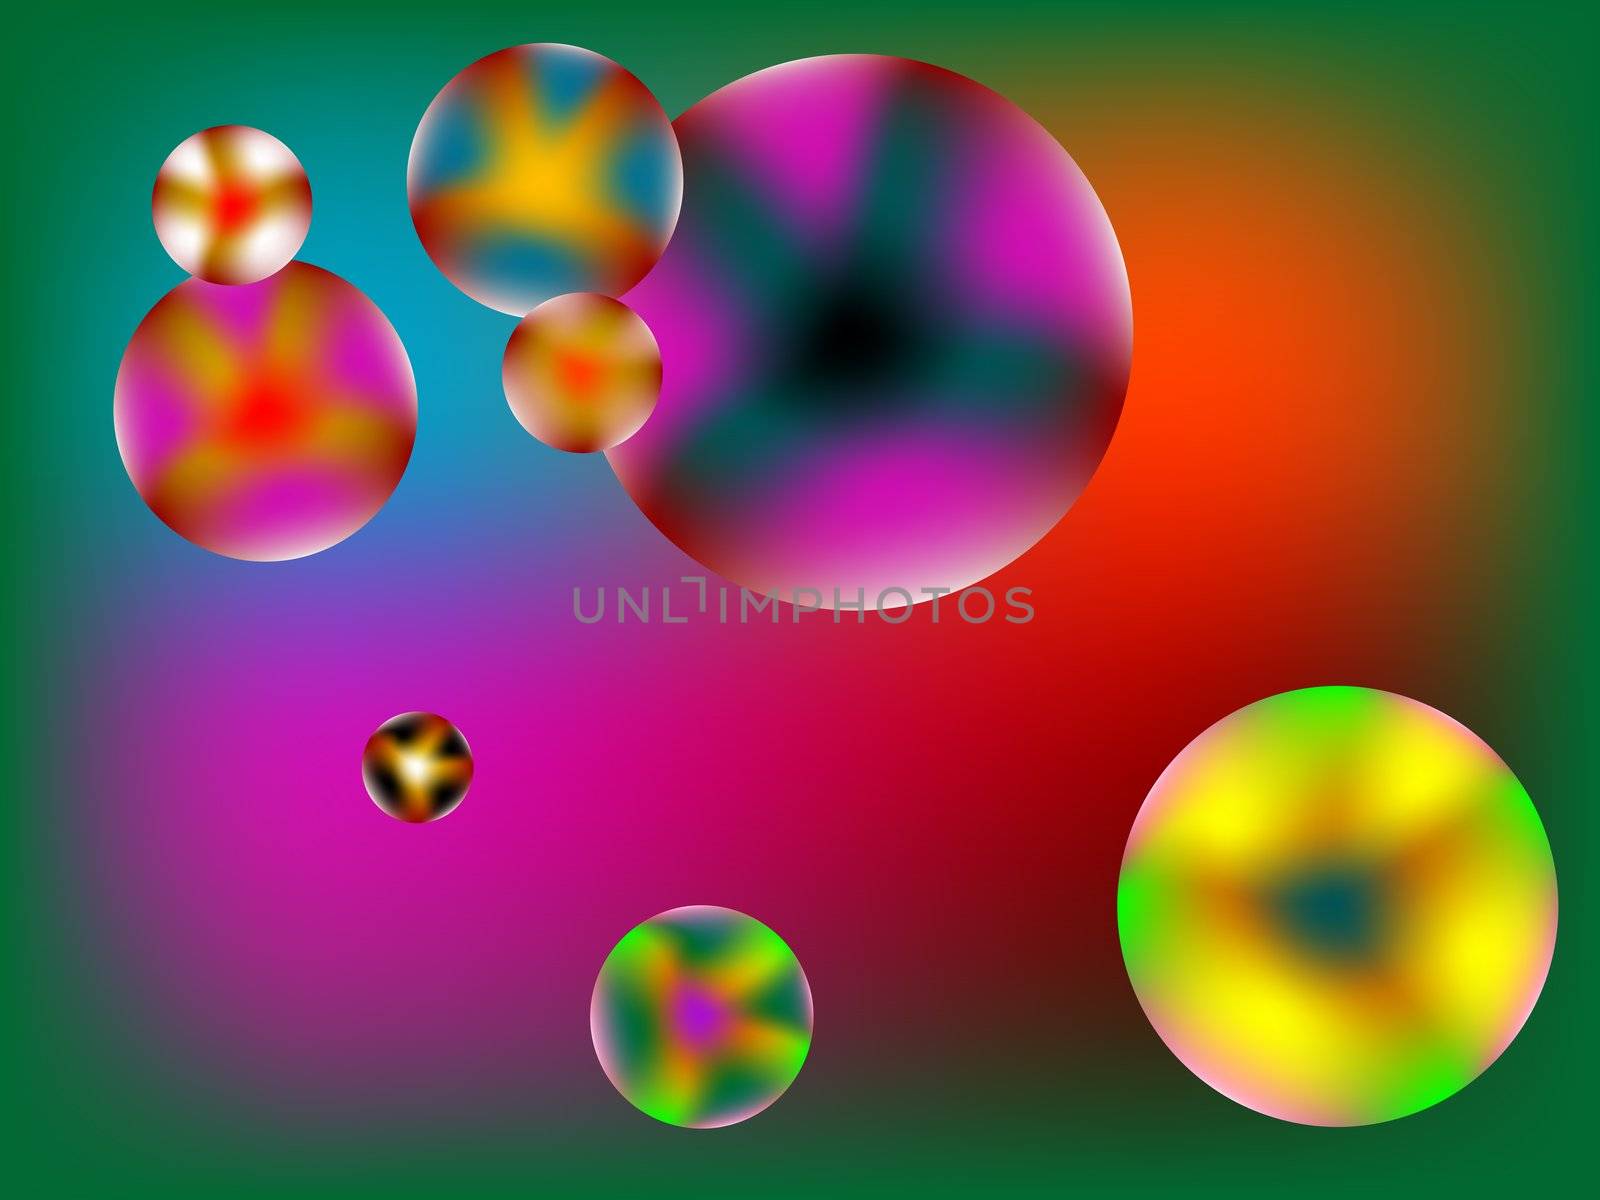 stylized bubbles against colored background, abstract vector art illustration